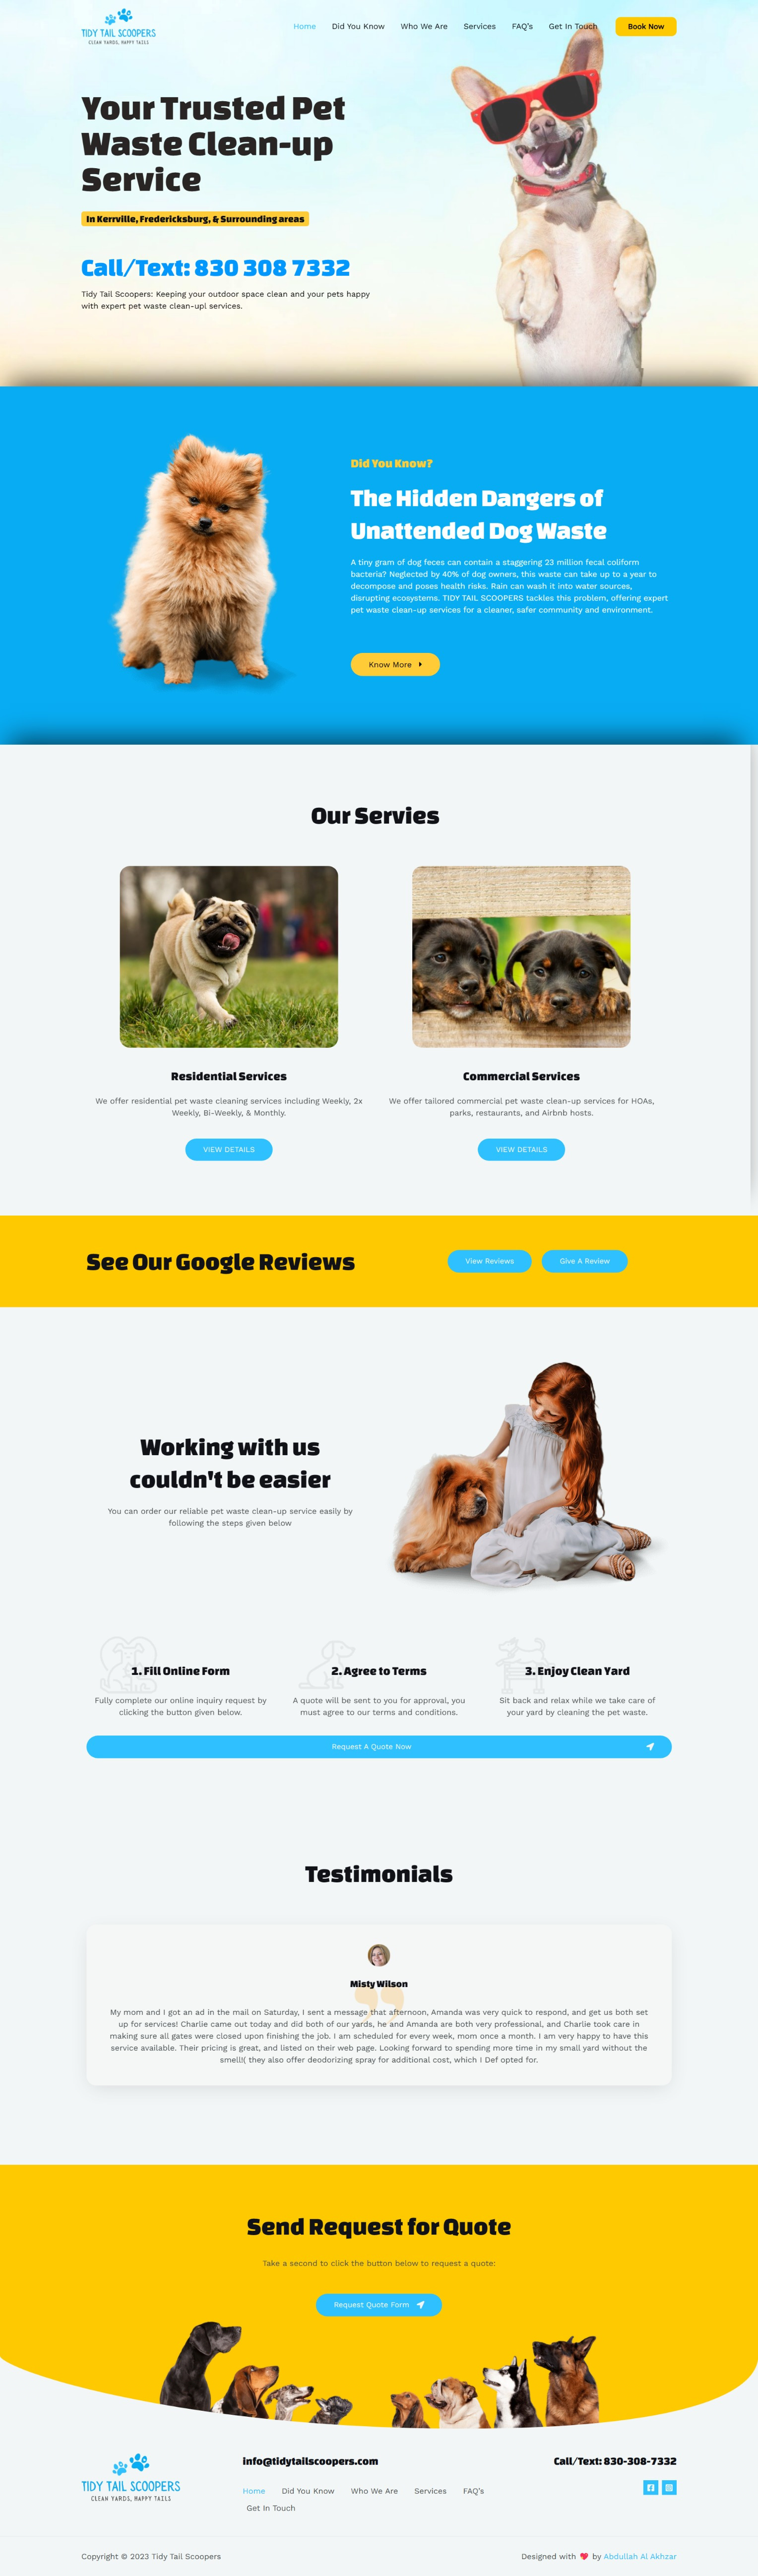 website design for pet waste removal company